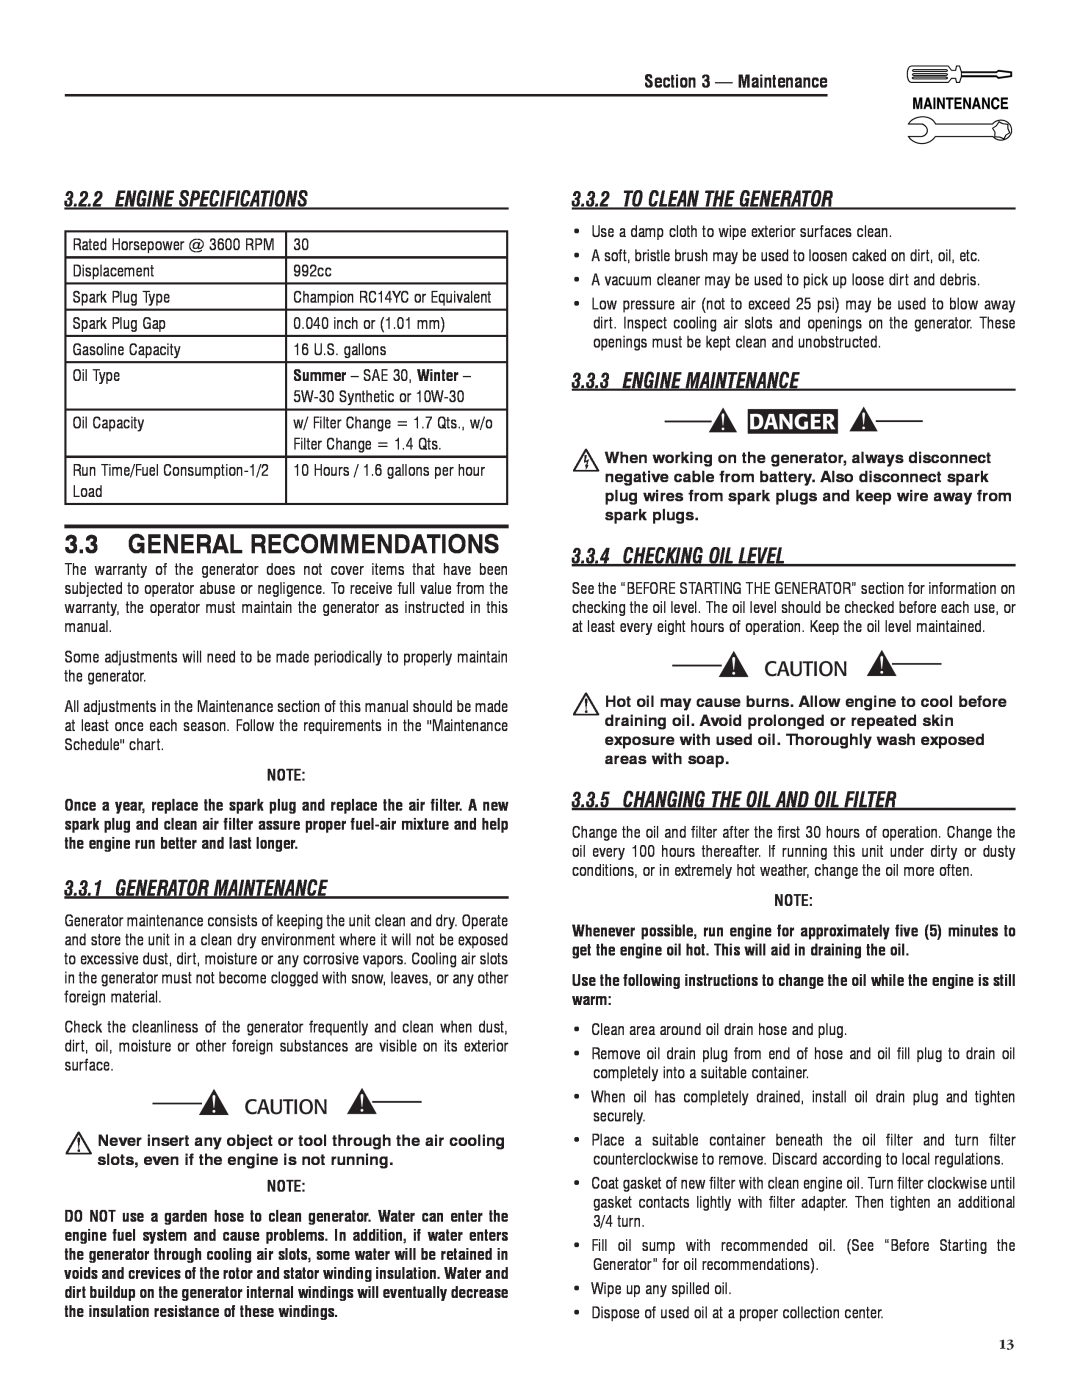 Sears 005734-0 manual General Recommendations, Engine Specifications, To Clean The Generator, Engine Maintenance, Danger 